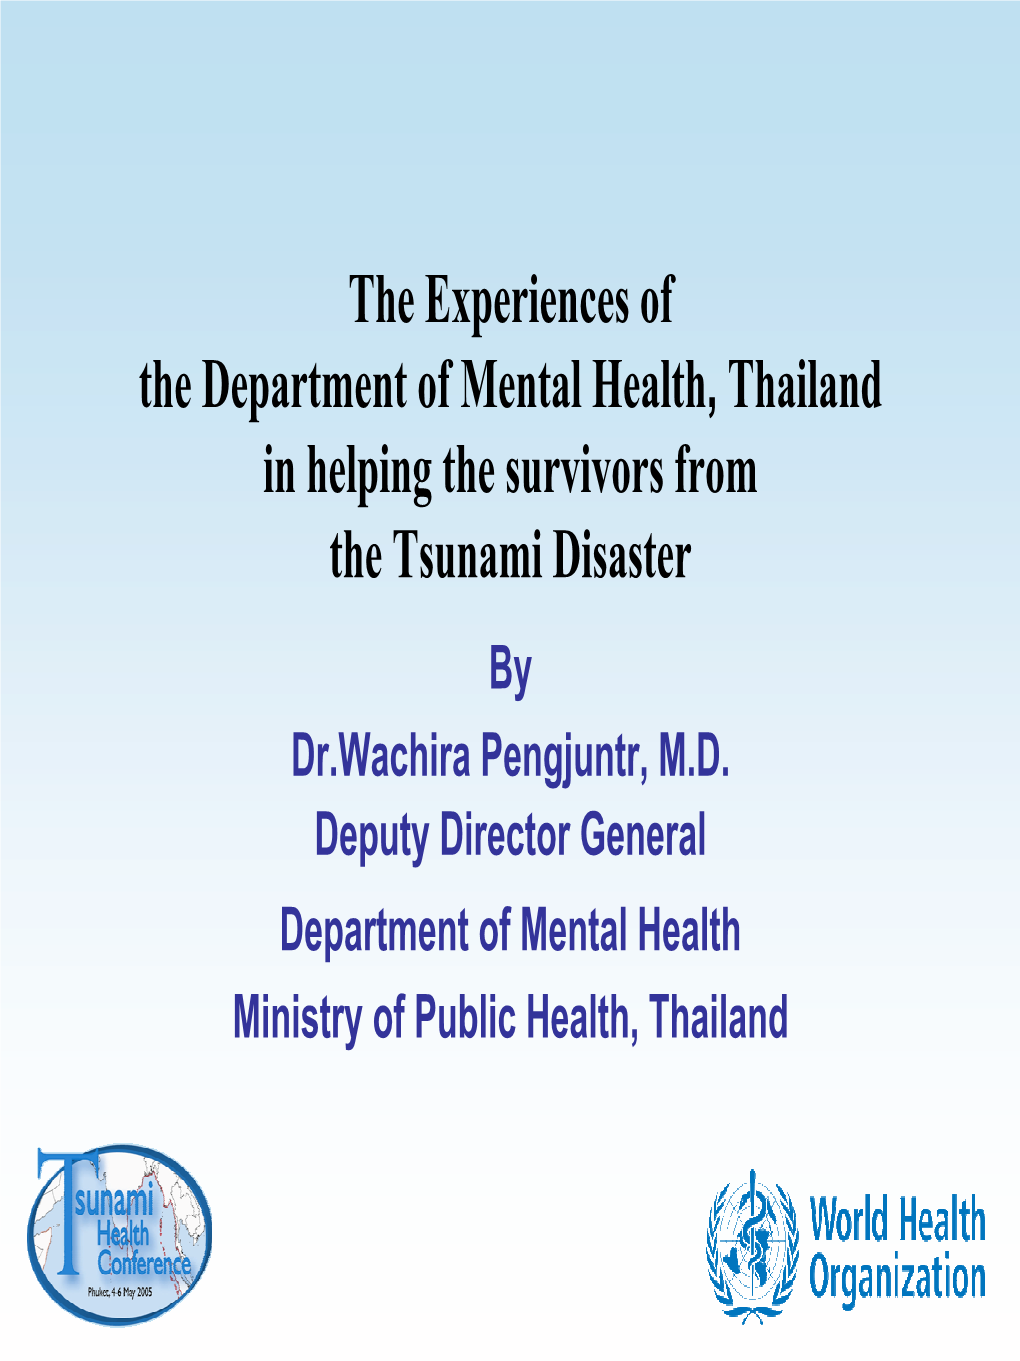 The Experiences of the Department of Mental Health, Thailand in Helping the Survivors from the Tsunami Disaster by Dr.Wachira Pengjuntr, M.D